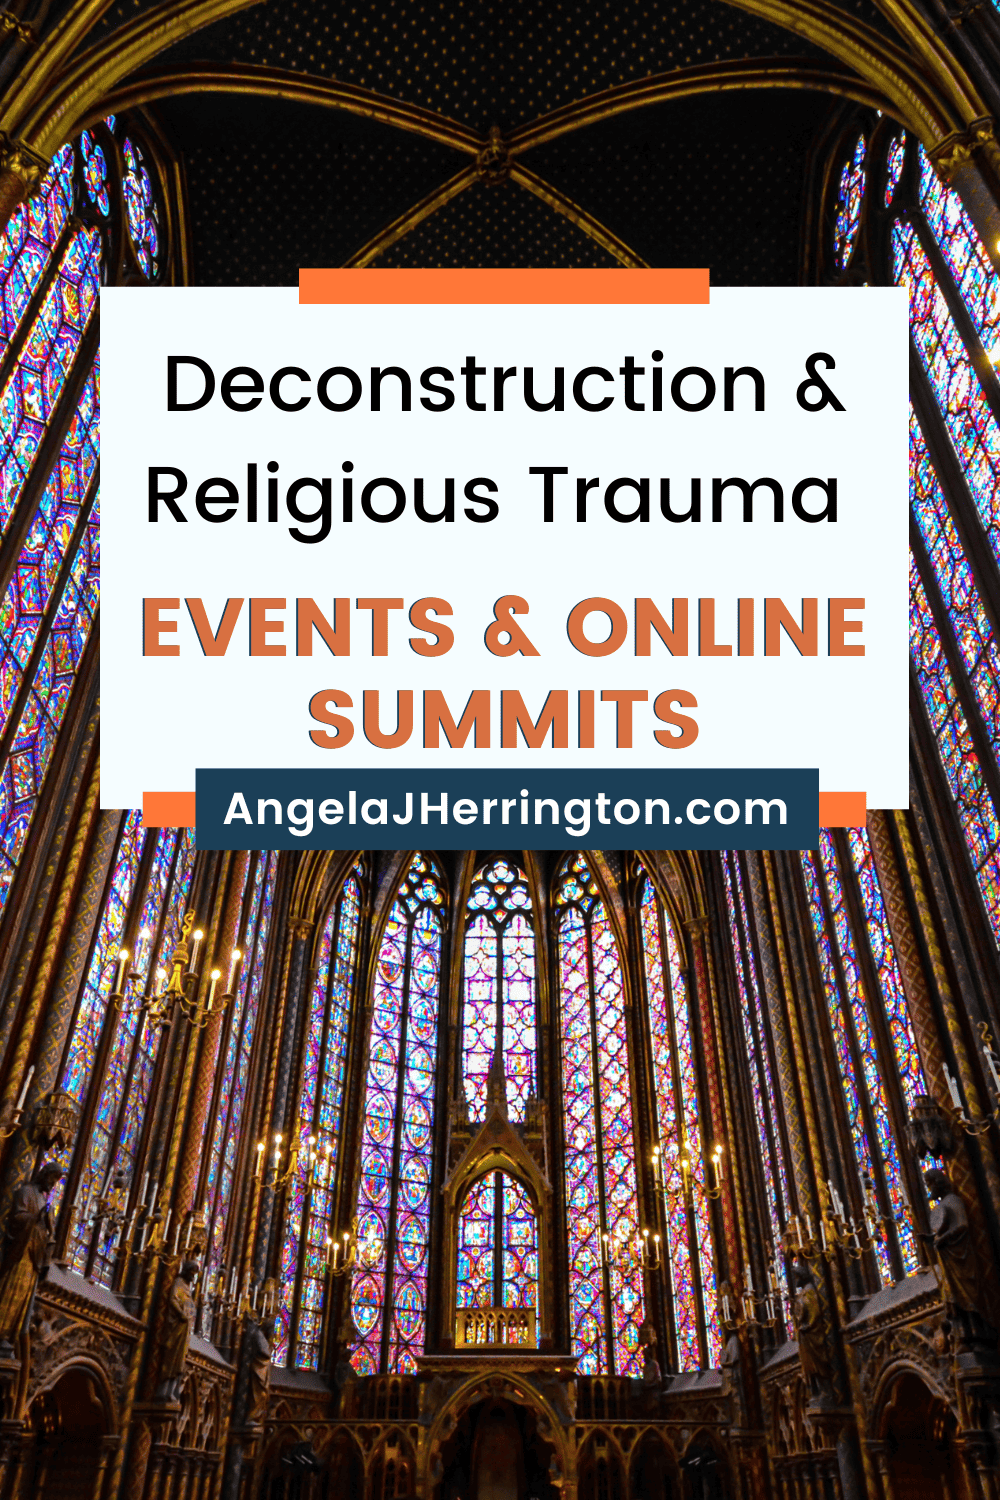 Wondering where to find a faith deconstruction confererence or event? Click here for my recommended list. Deconstruction conferences